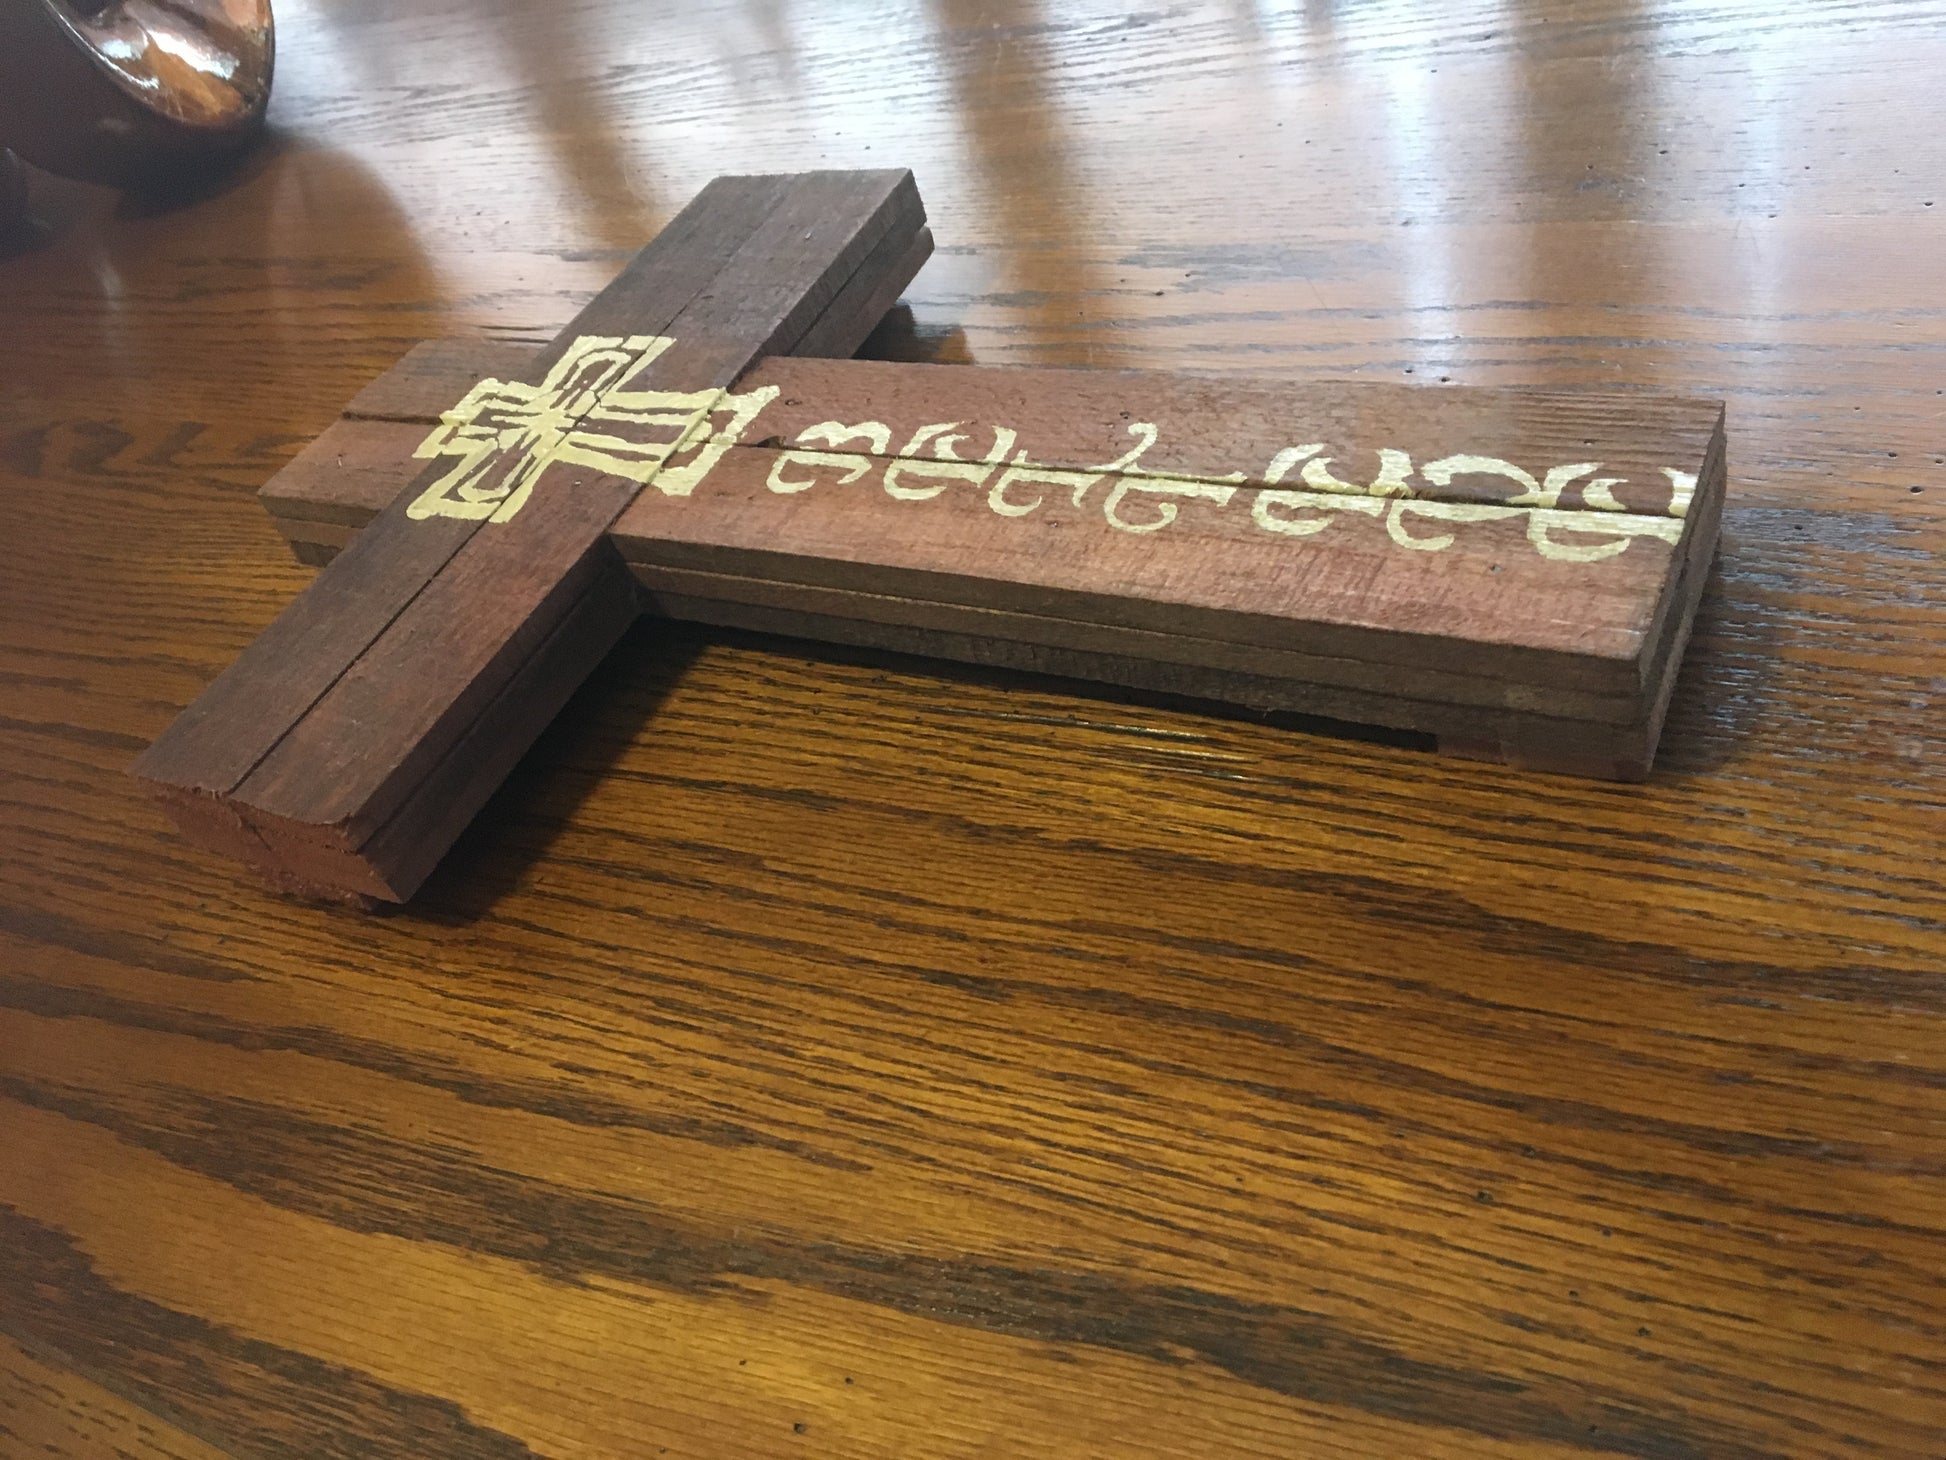 Believe wood sign on table